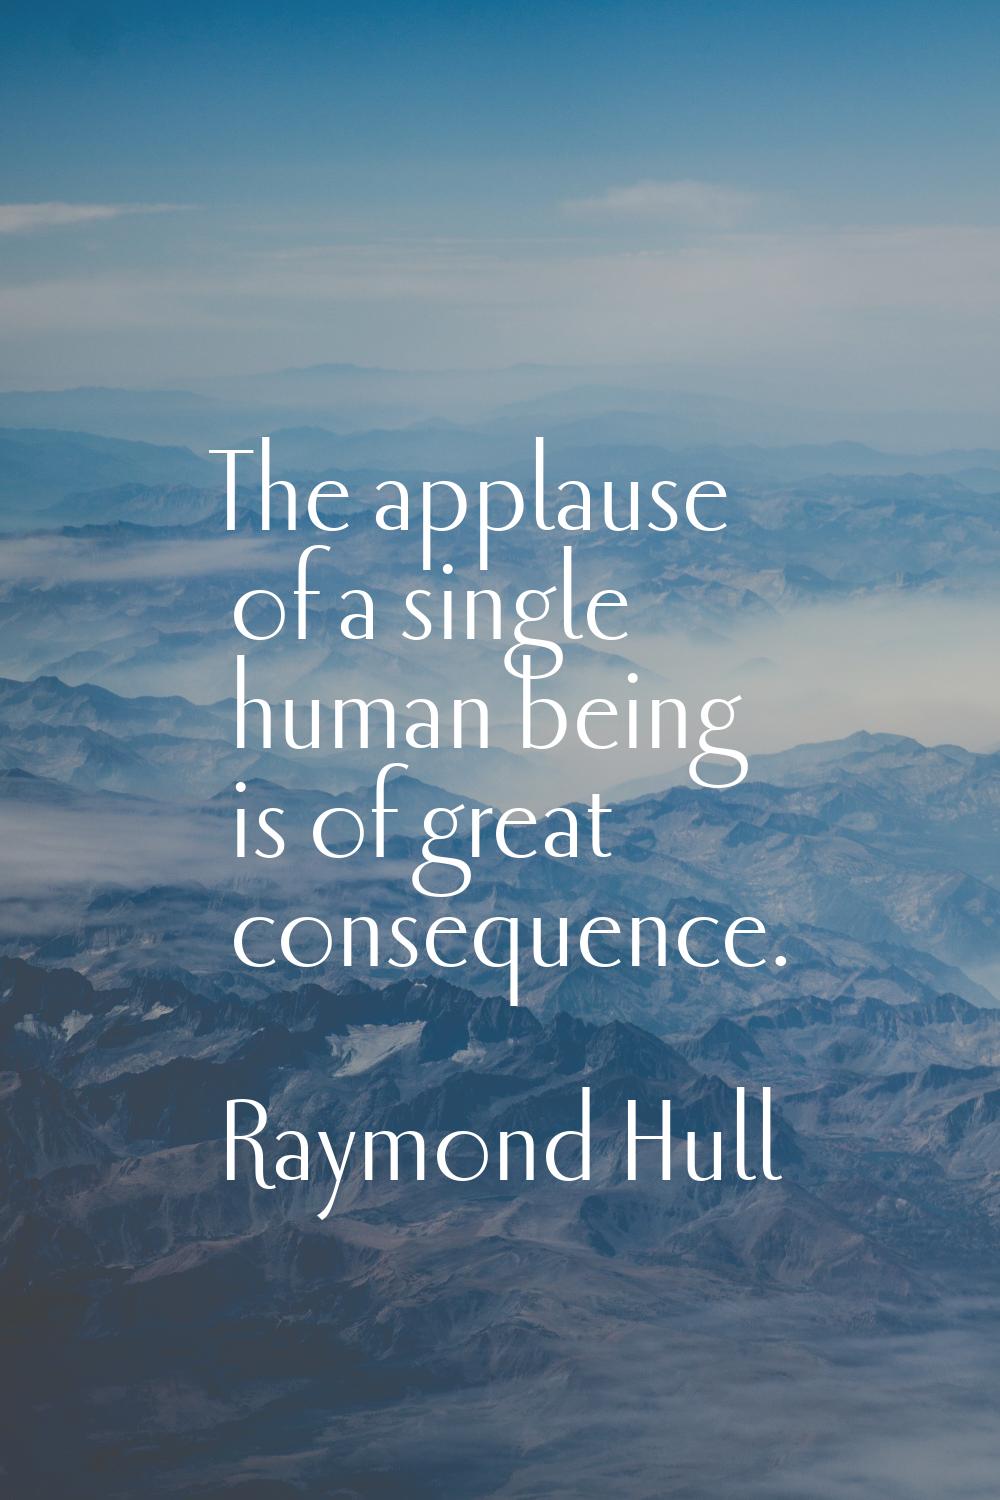 The applause of a single human being is of great consequence.